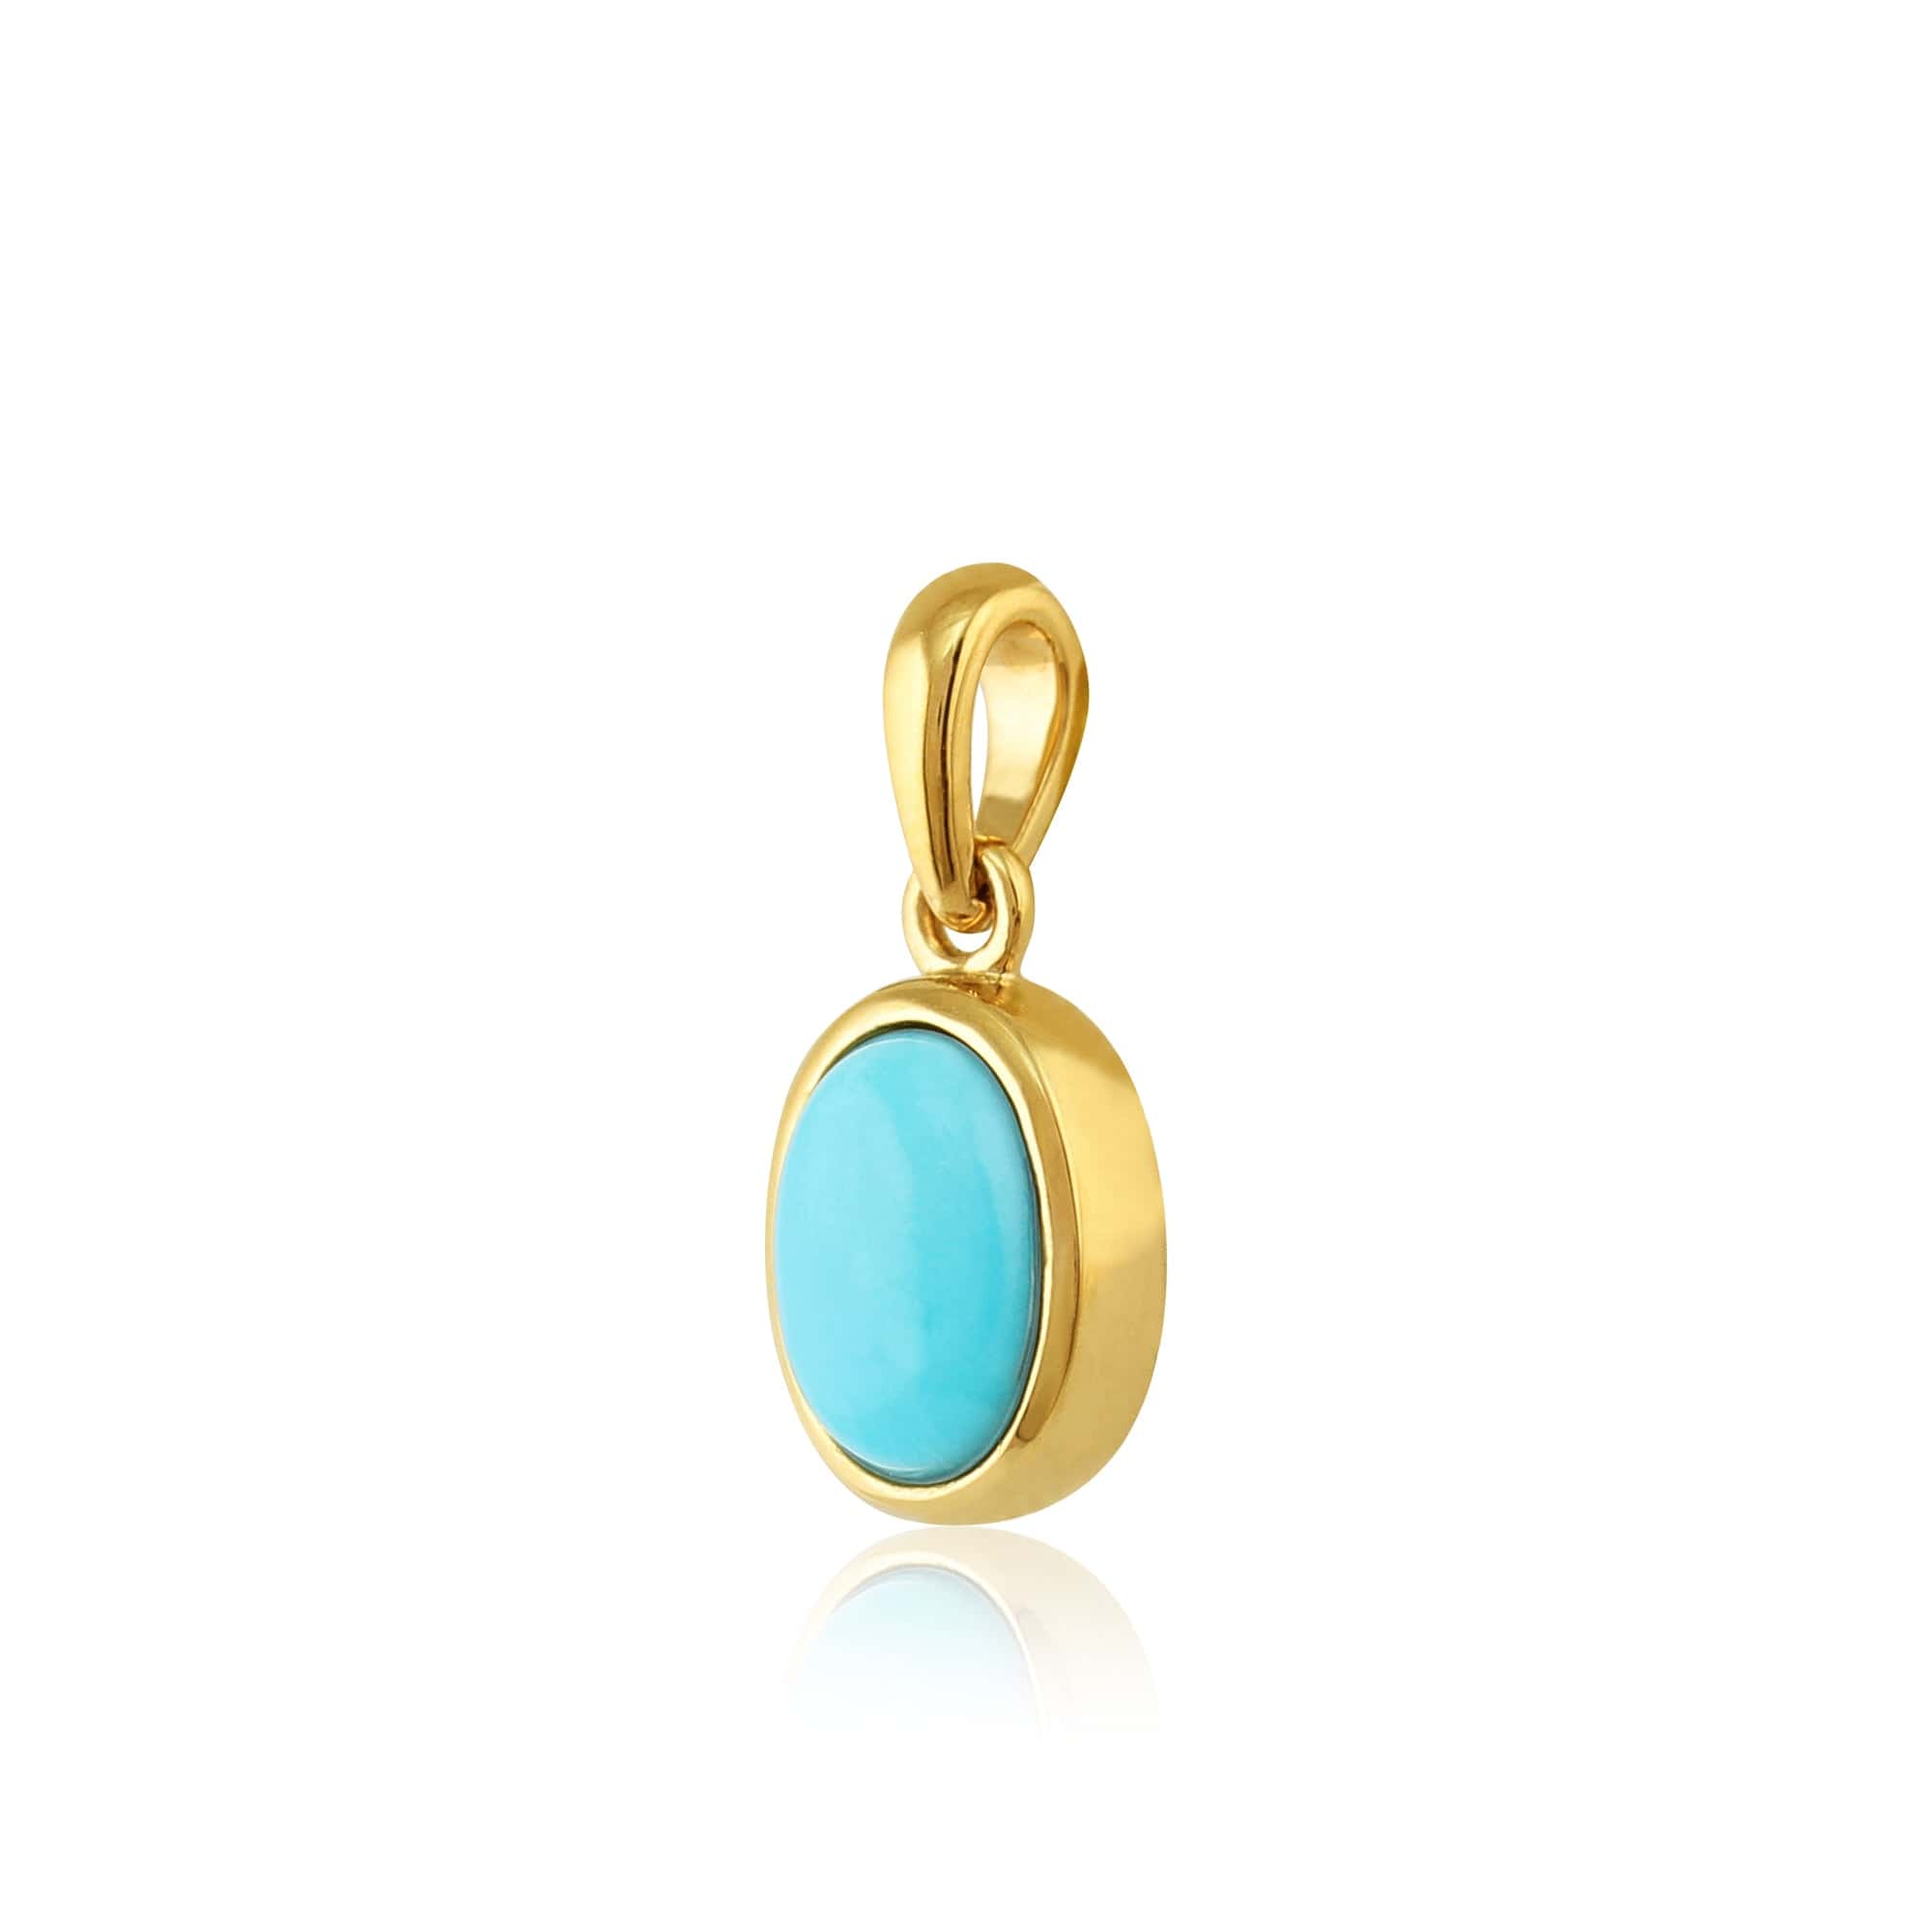 8016 Classic Turquoise Cabochon Pendant in 9ct Yellow Gold 2